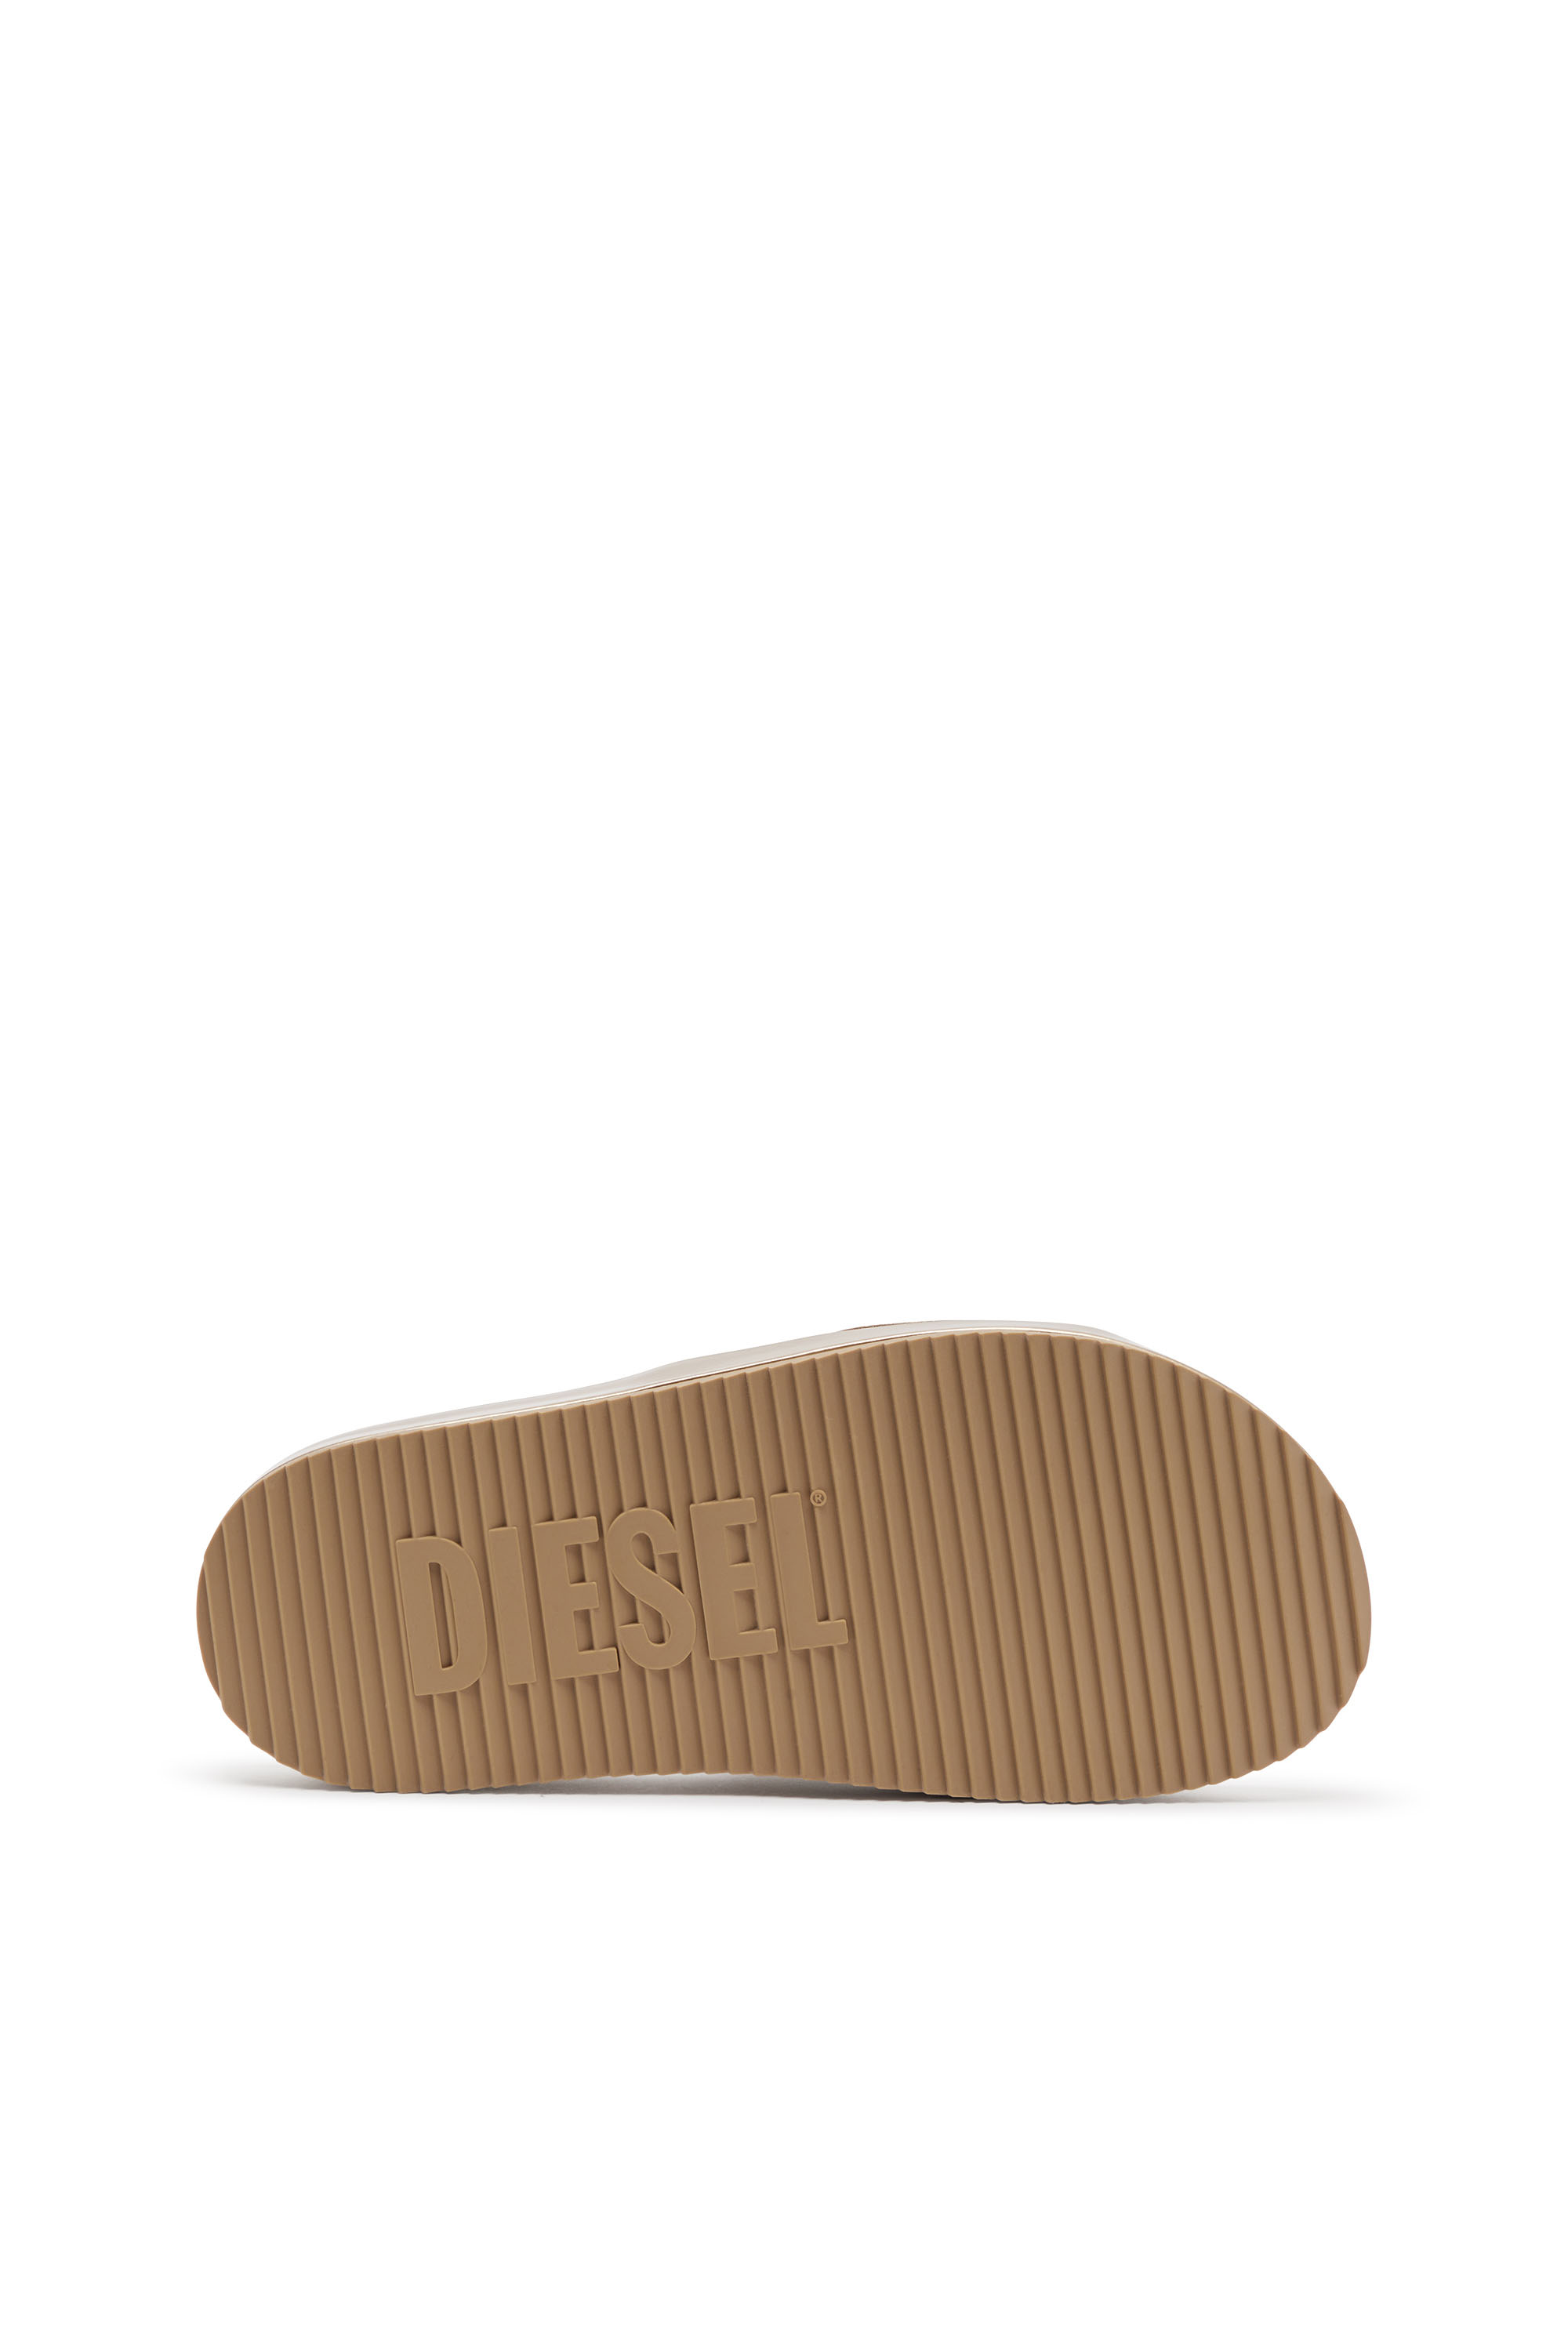 Diesel - SA-SLIDE D OVAL W, Woman Sa-Slide D-Metallic slide sandals with Oval D strap in Oro - Image 4